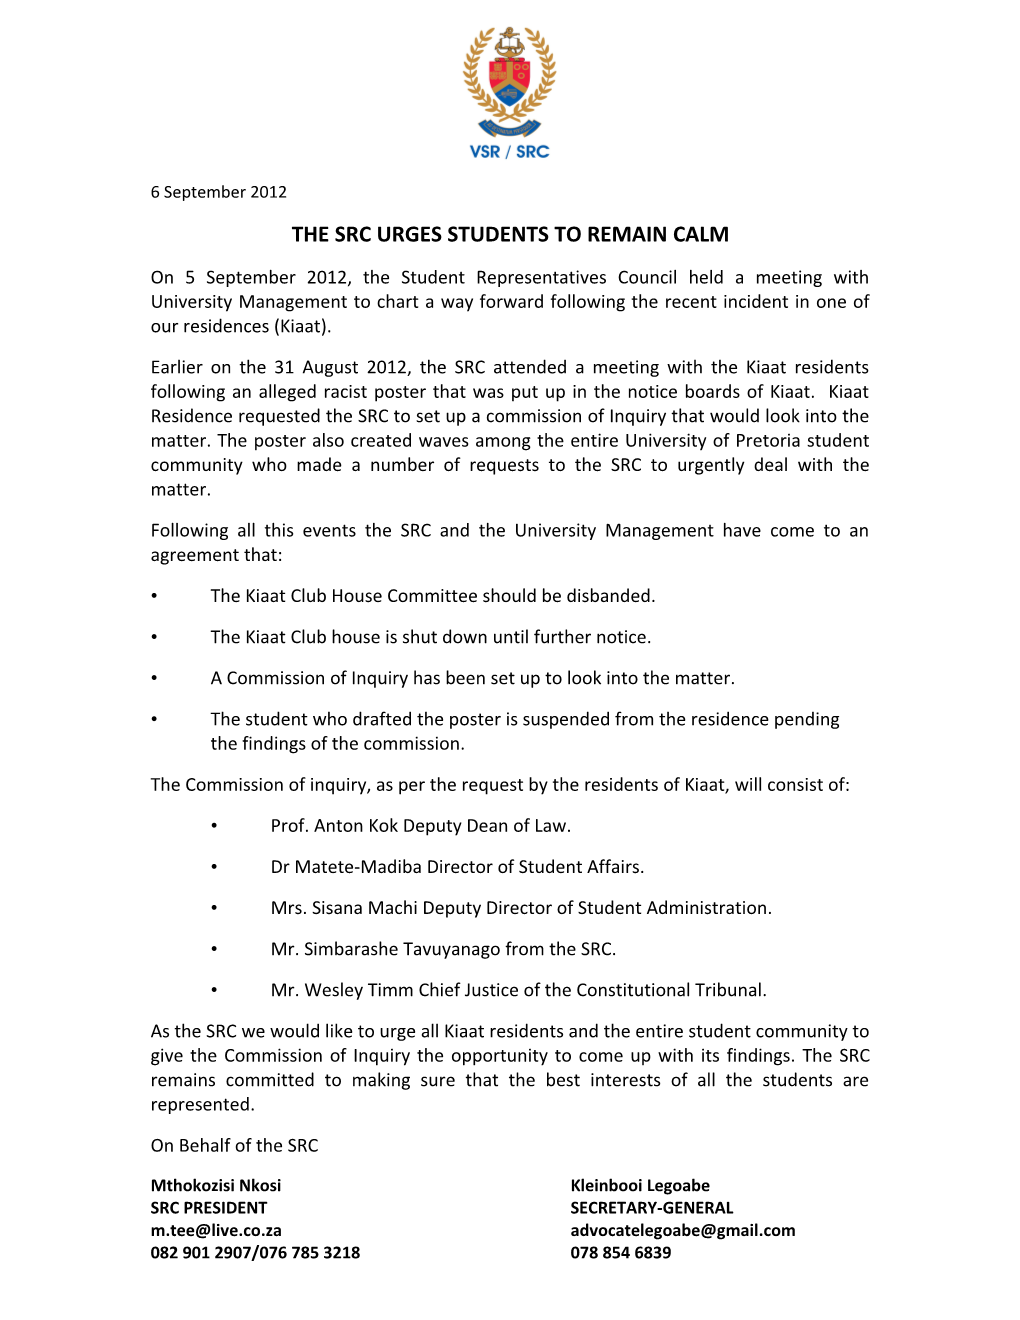 The Src Urges Students to Remain Calm